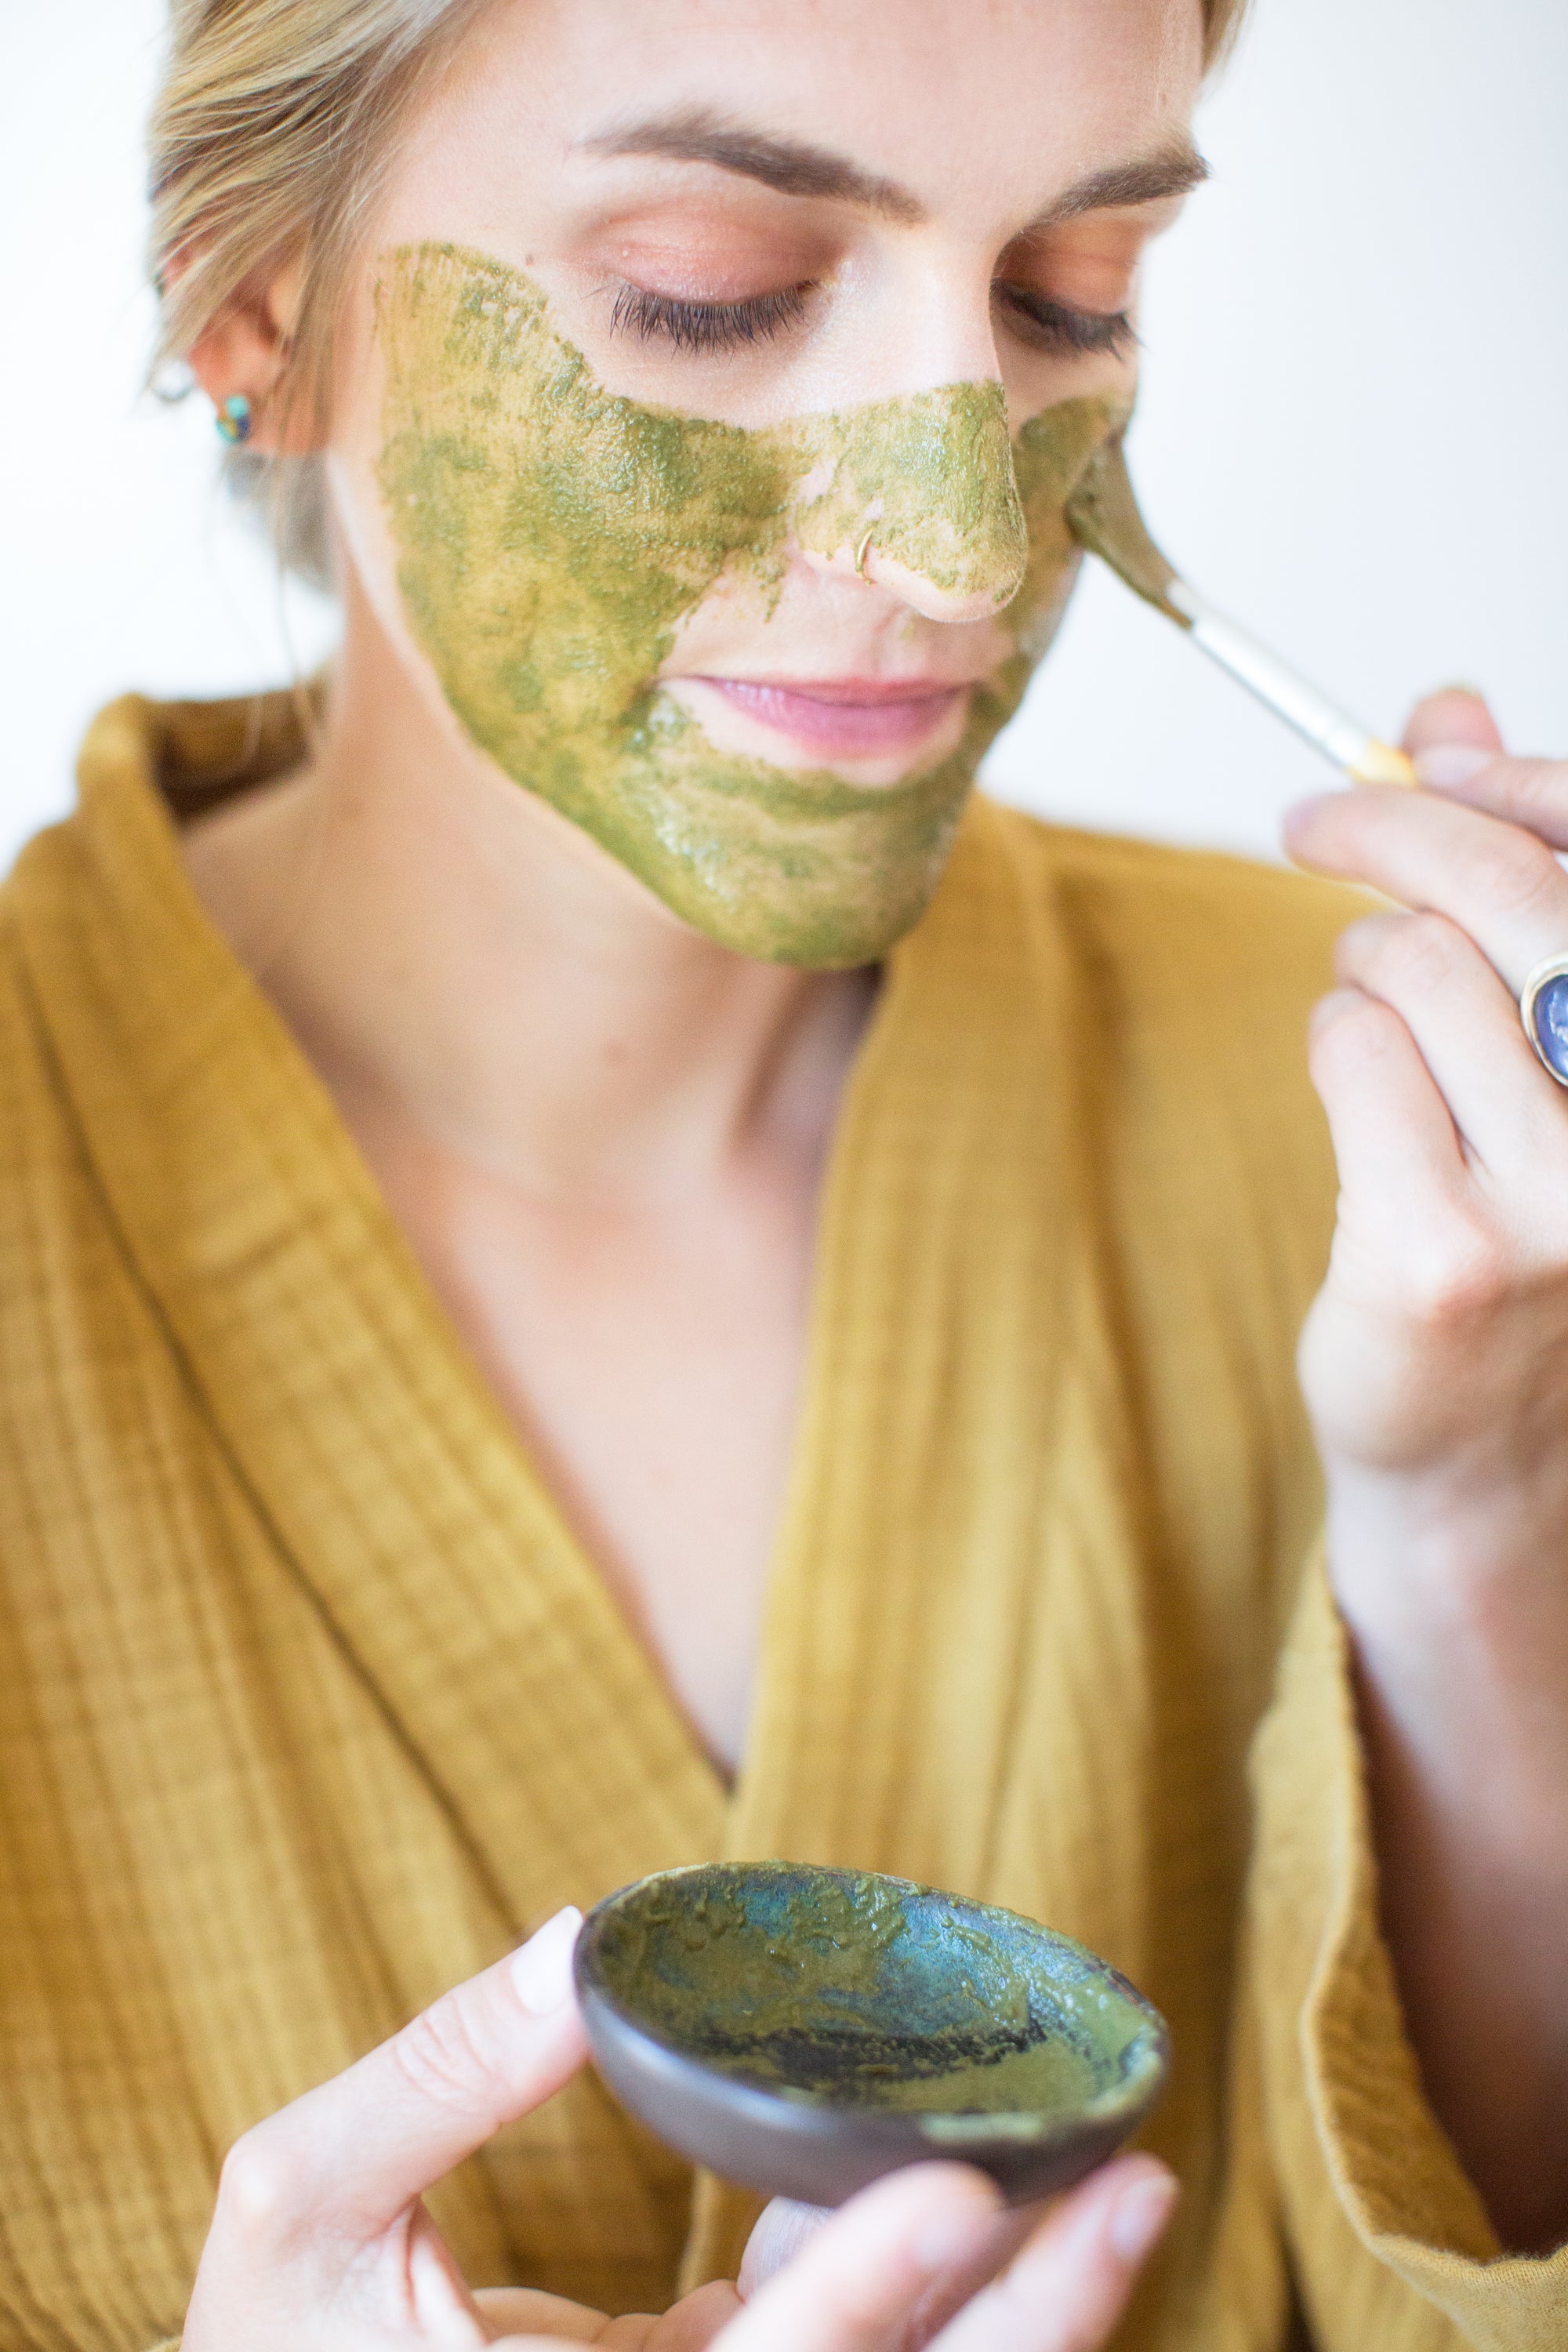 Woman applying face mask to face with brush: Organic herb and clay matcha lavender face mask by Good Flower Farm